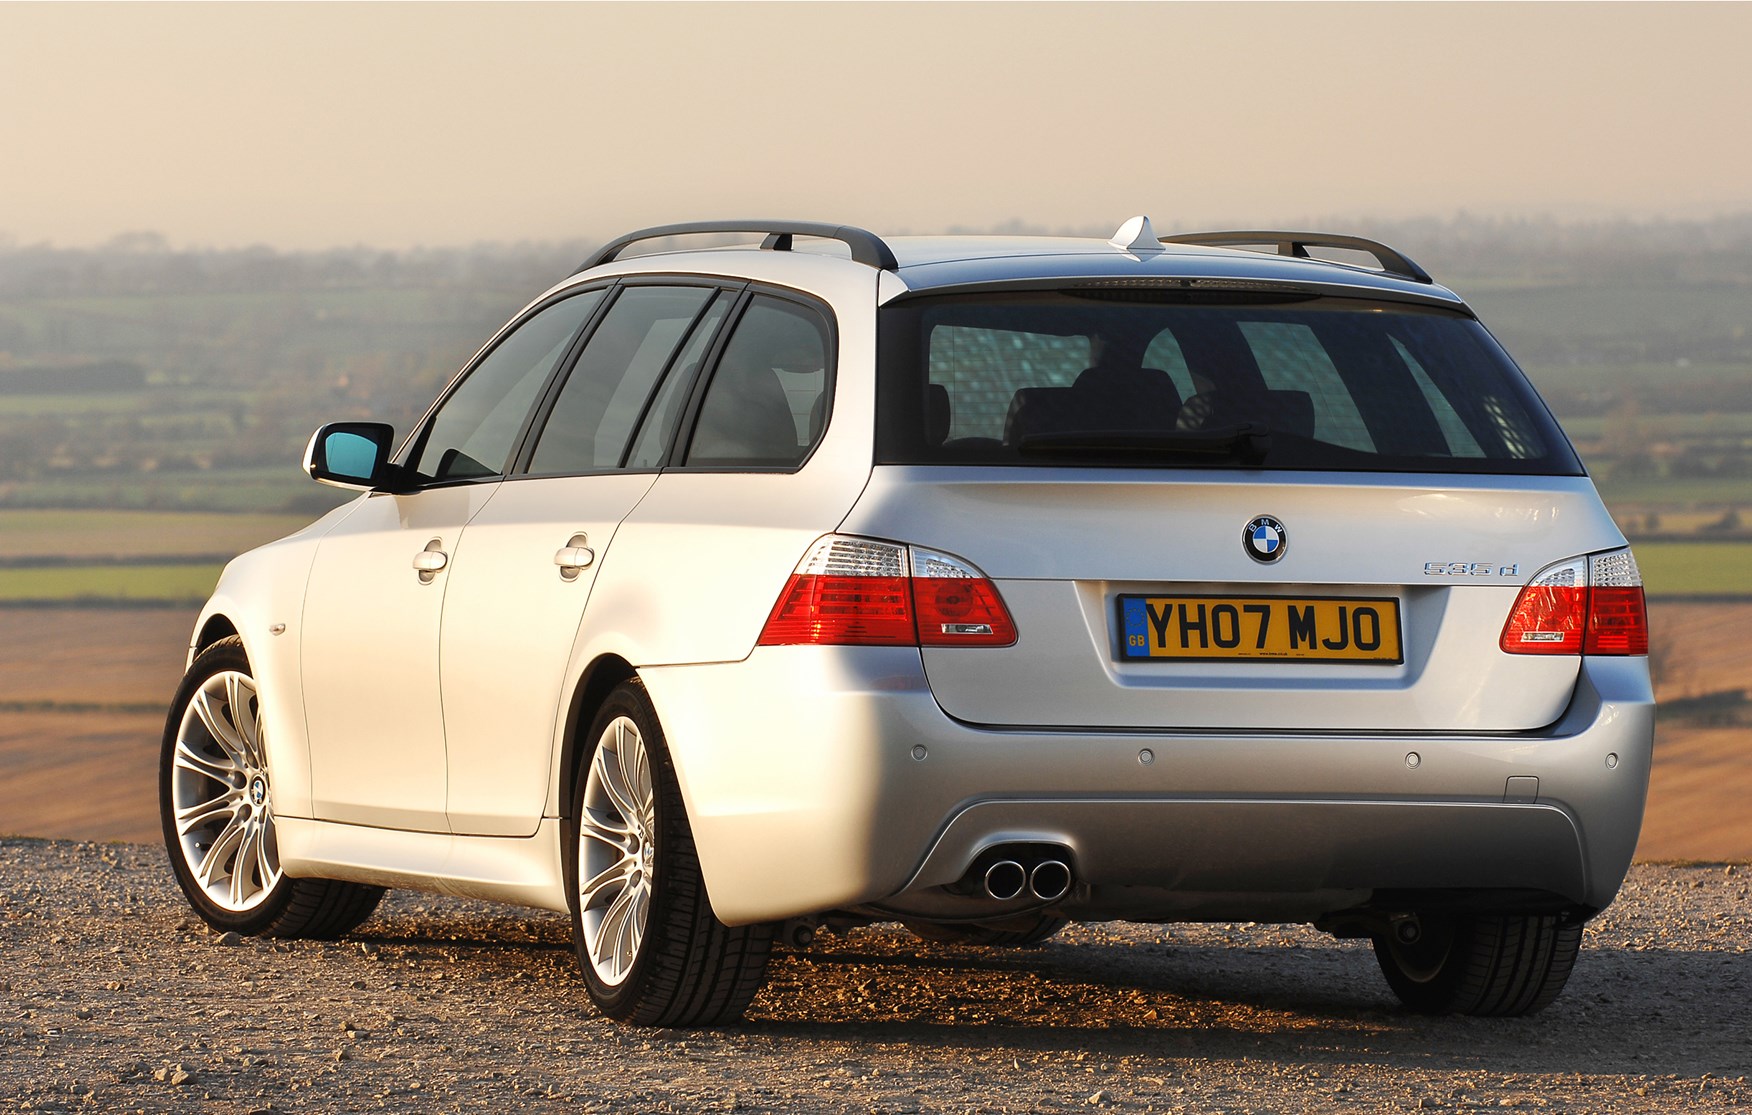 Used BMW 5-Series Touring (2003 - 2010) Parkers